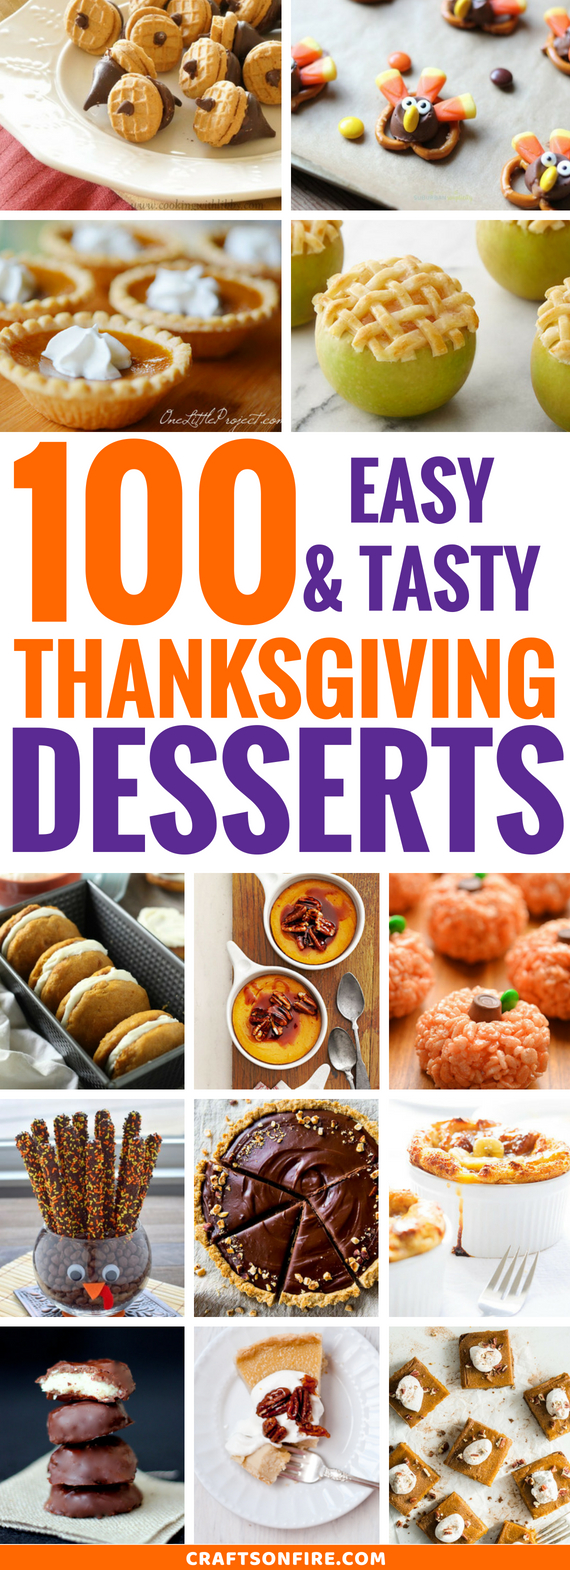 100 Easy Thanksgiving Desserts Ideas Your Family Will Love - Craftsonfire